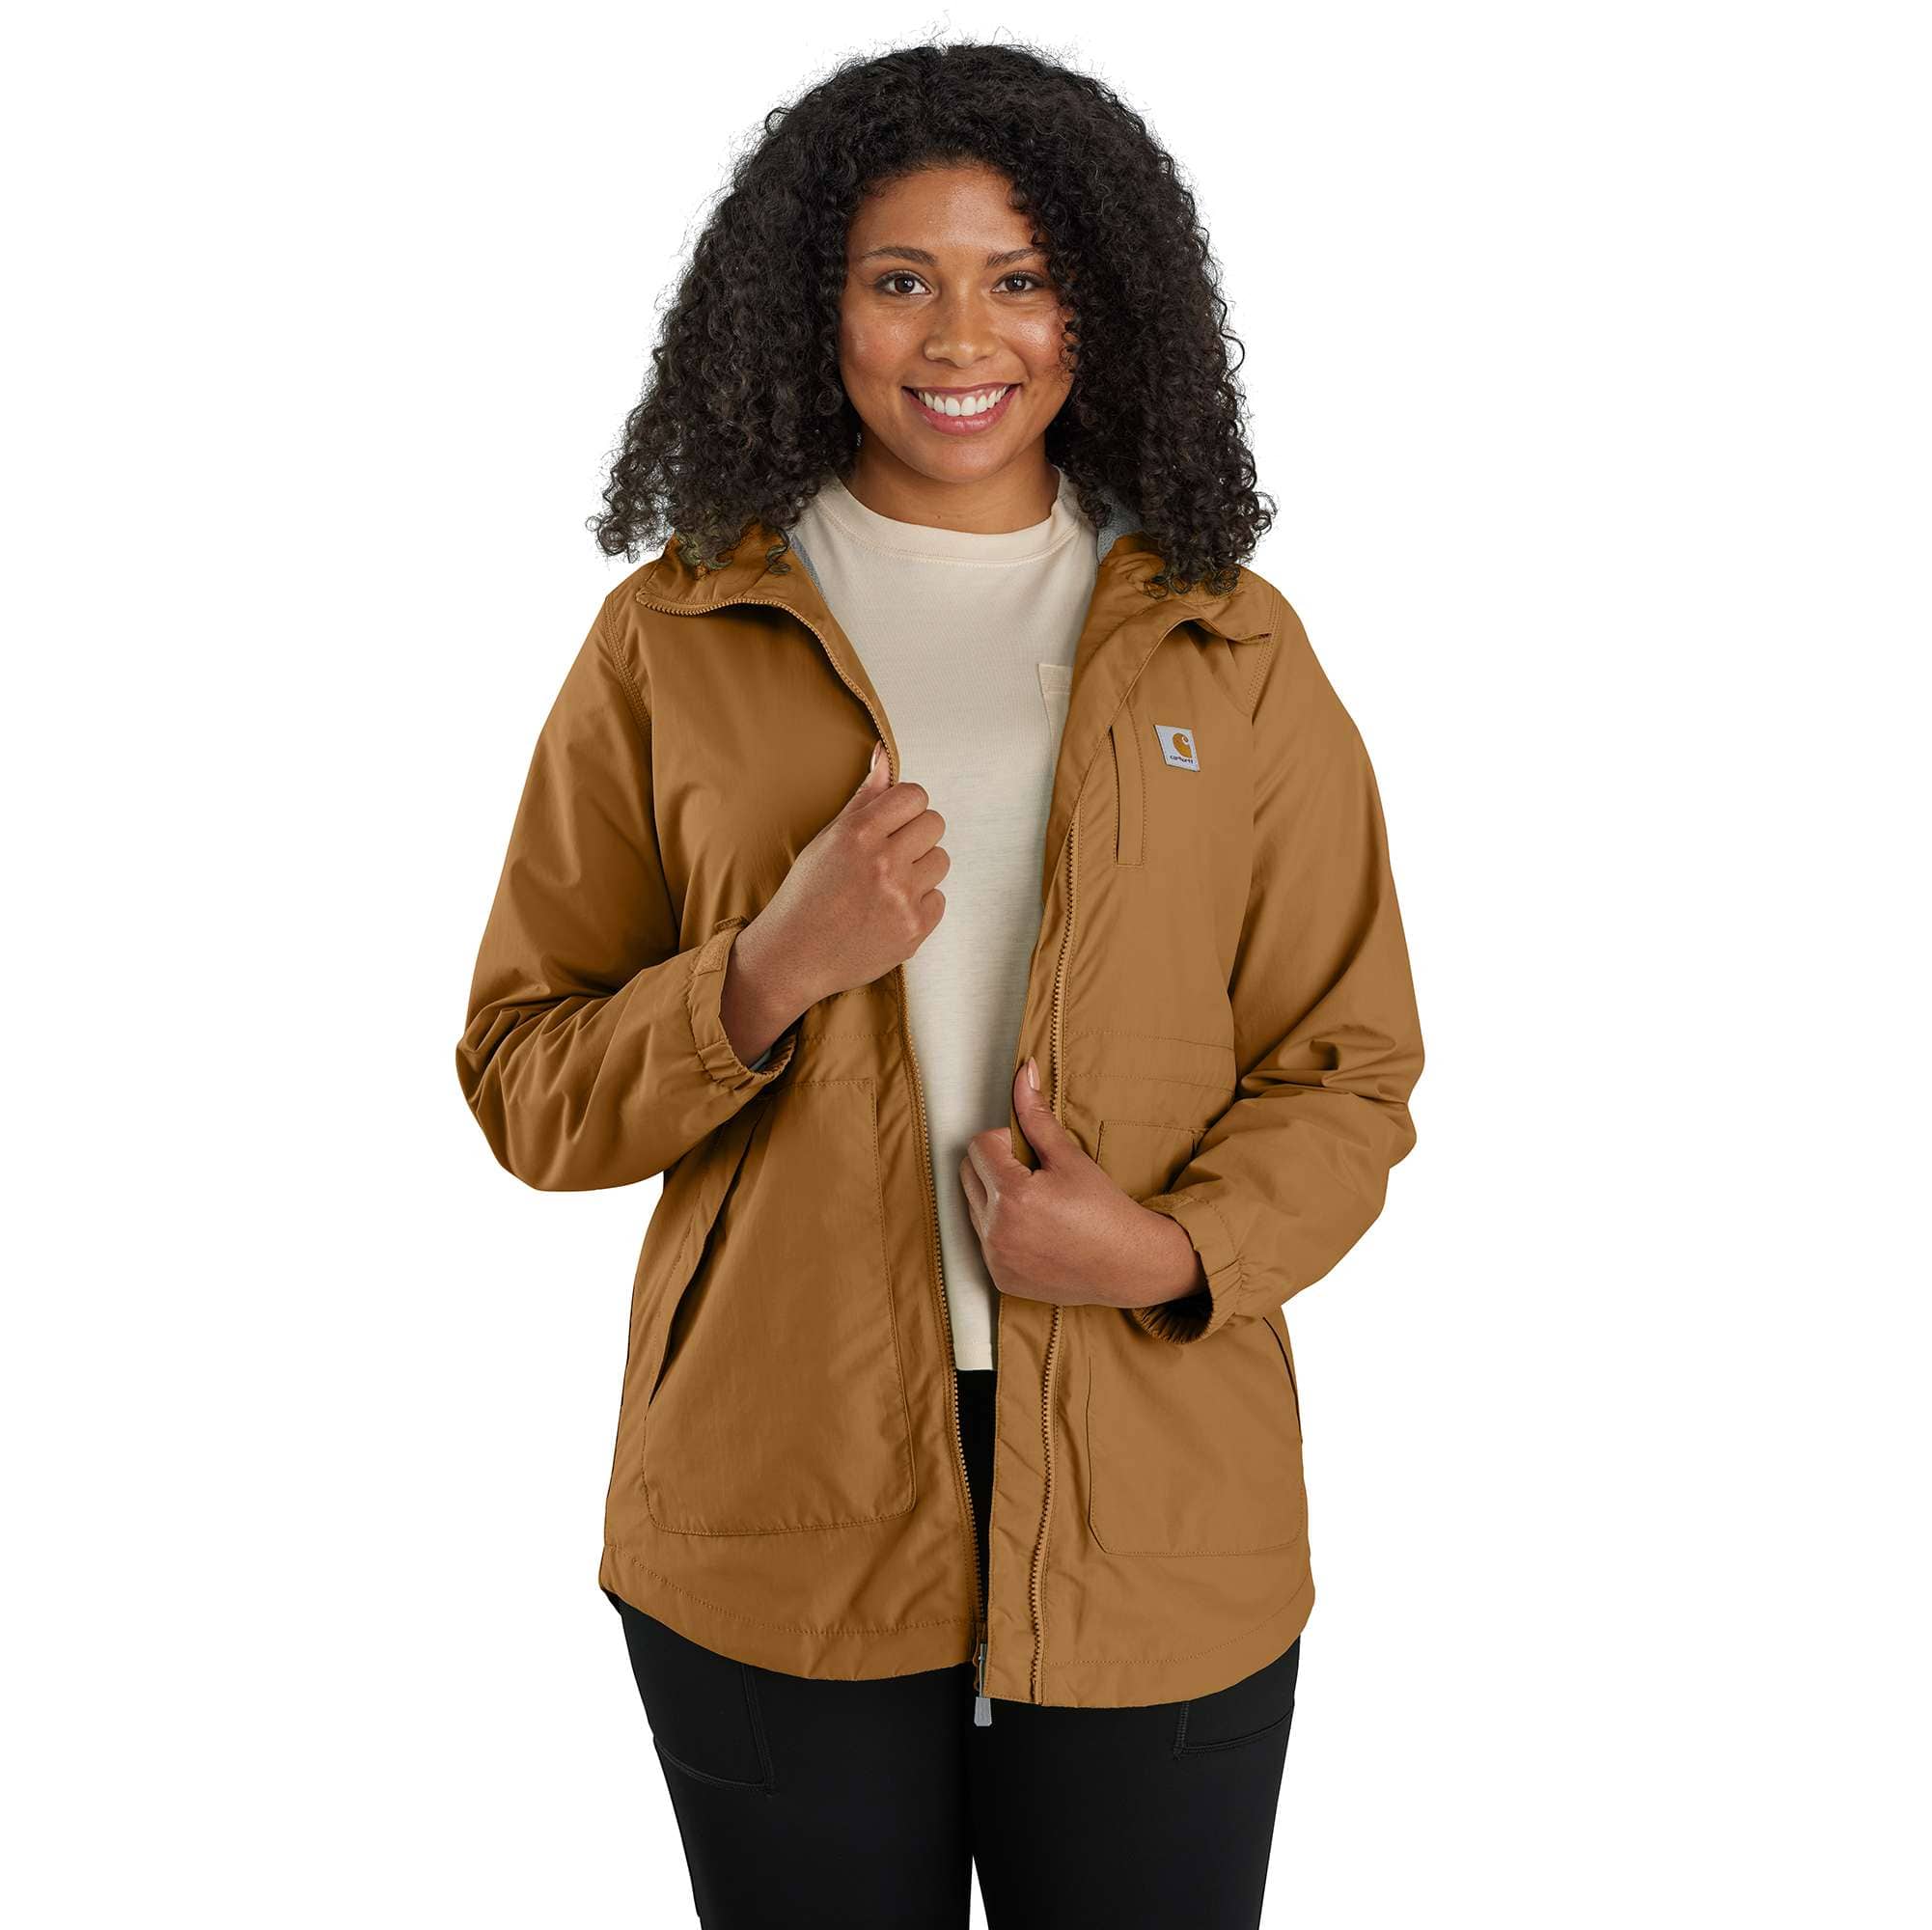 Women's Storm Defender® Jacket - Relaxed Fit - Heavyweight - 1 Warm Rating